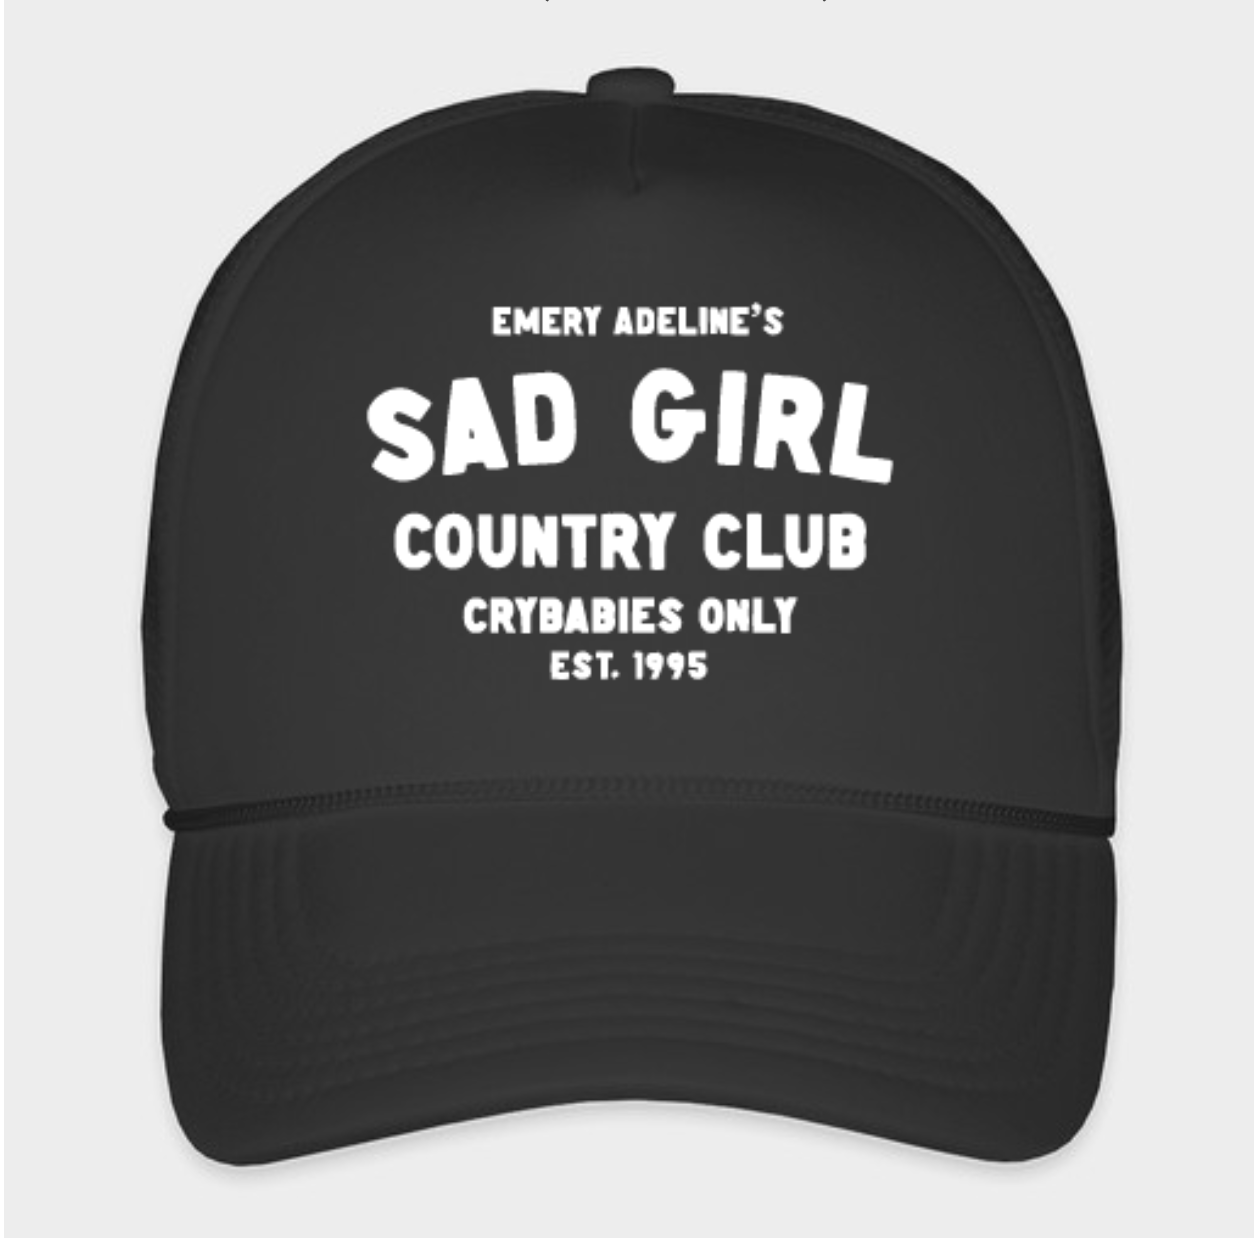 Black trucker hat with text "Emery Adeline's Sad Girl Country Club Crybabies Only Est. 1995"